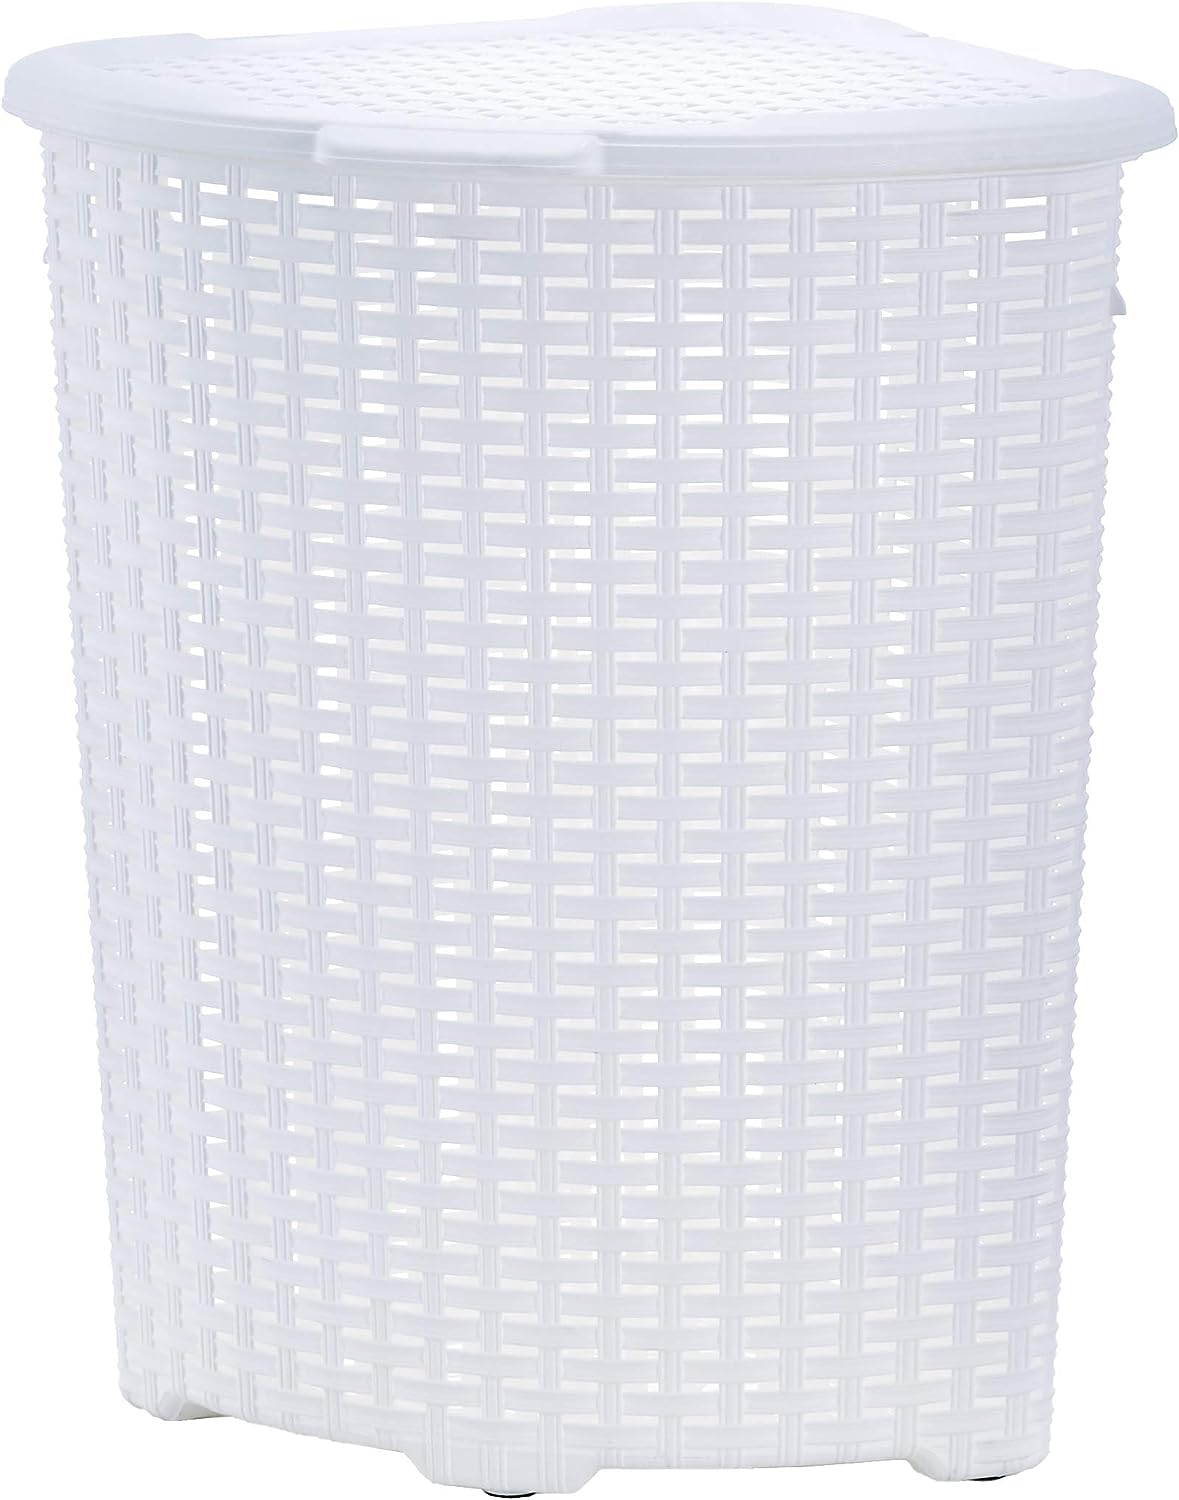 Superio 52L Corner Laundry Hamper with Lid, Curved Plastic Laundry Basket with handles, Wicker Design, White